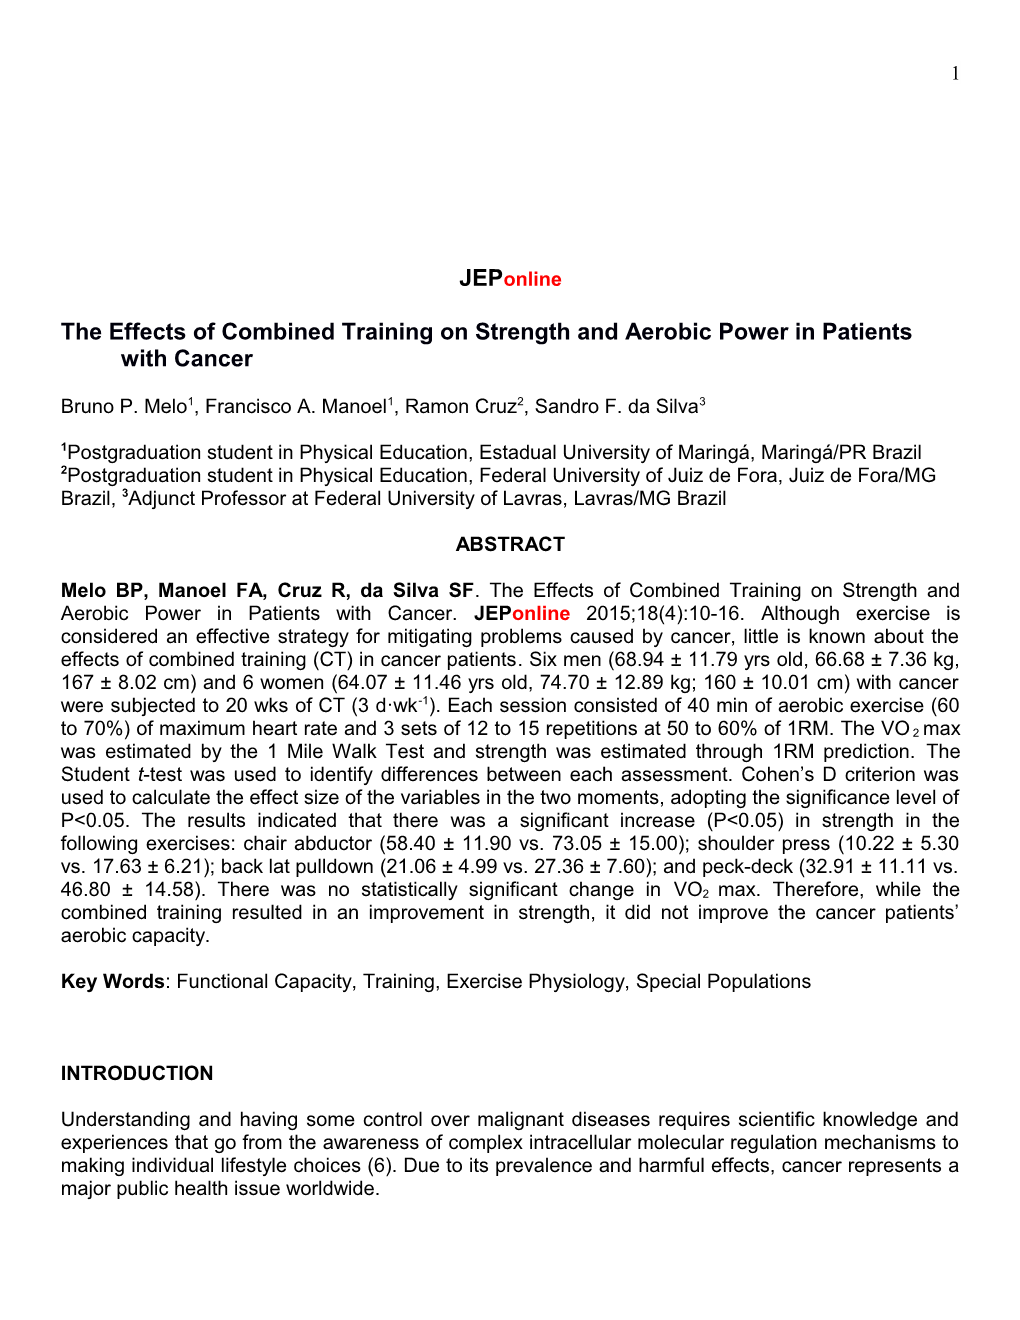 The Effects of Combined Training on Strength and Aerobic Power in Patients with Cancer